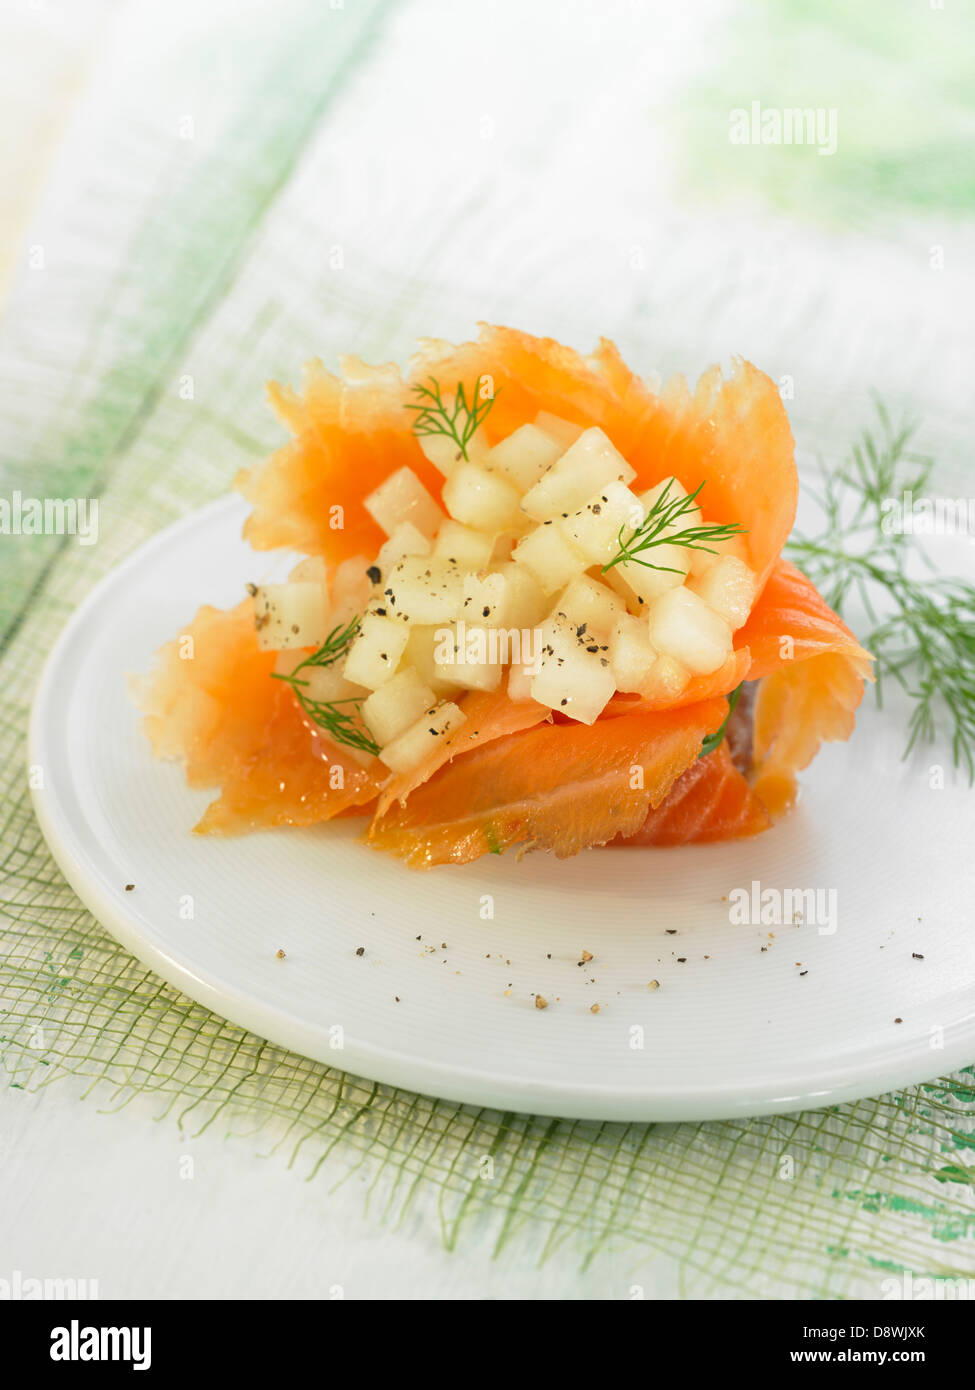 Smoked salmon with diced pears and fennel Stock Photo